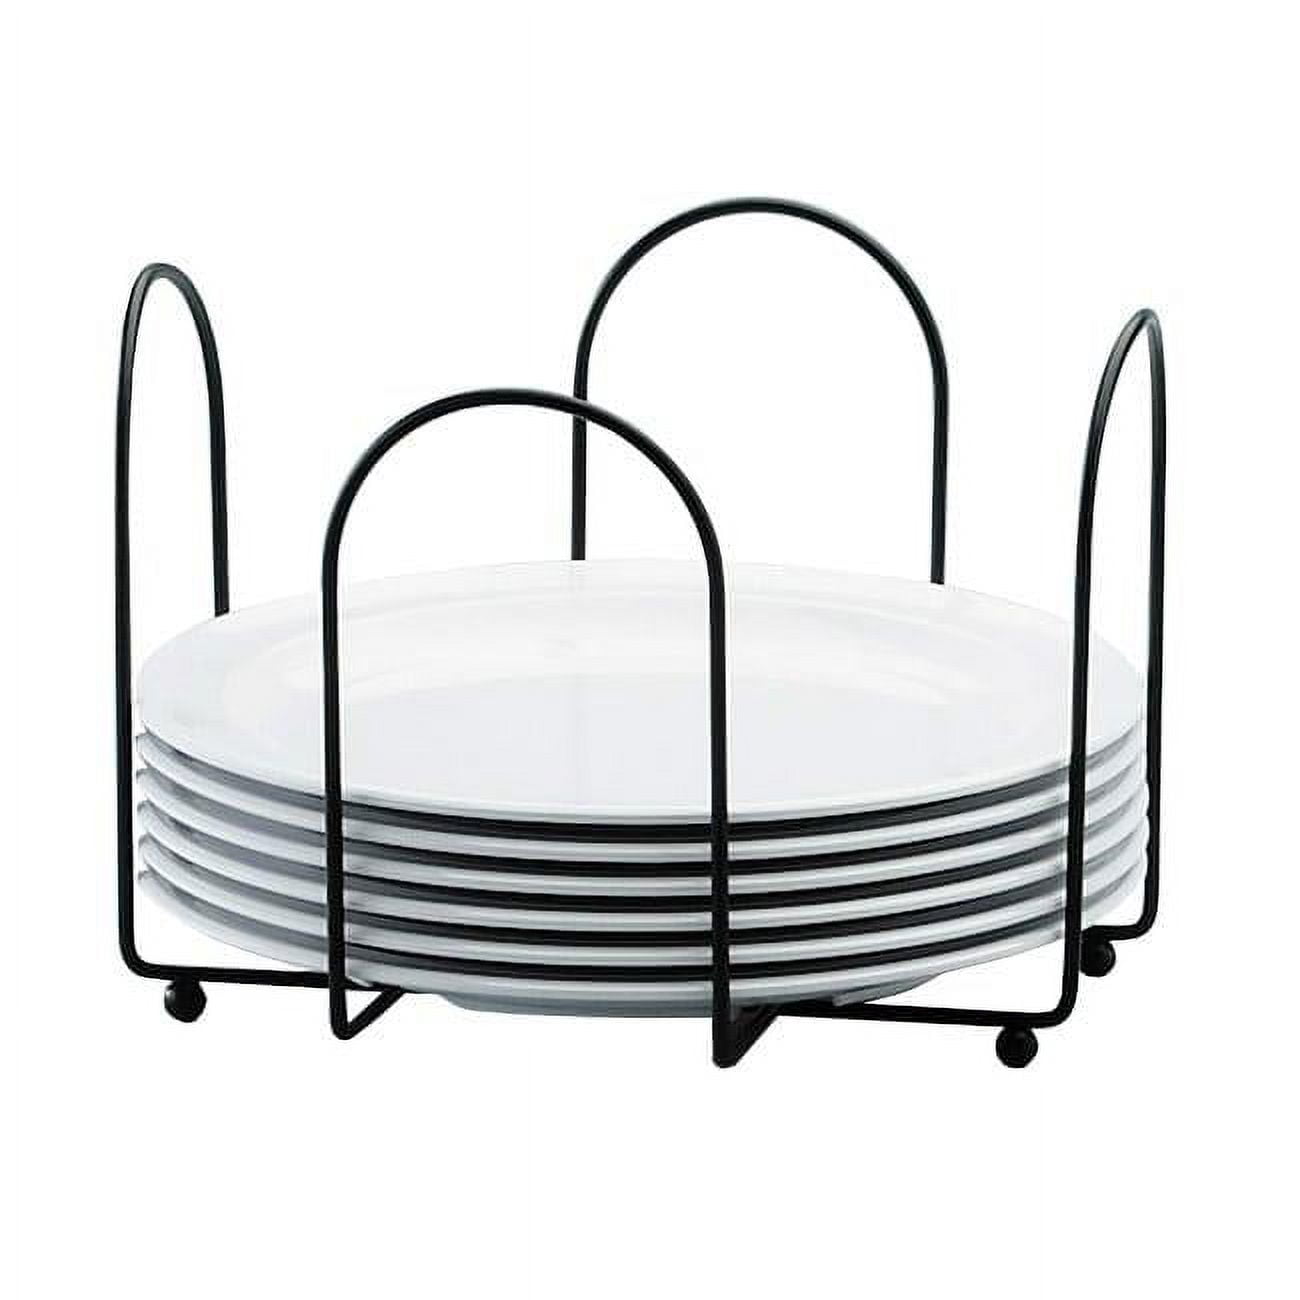 Picture of Cal Mil 1236 Iron 8.5 in. Plate & Napkin Holder - 9.5 x 9.5 x 6.5 in.